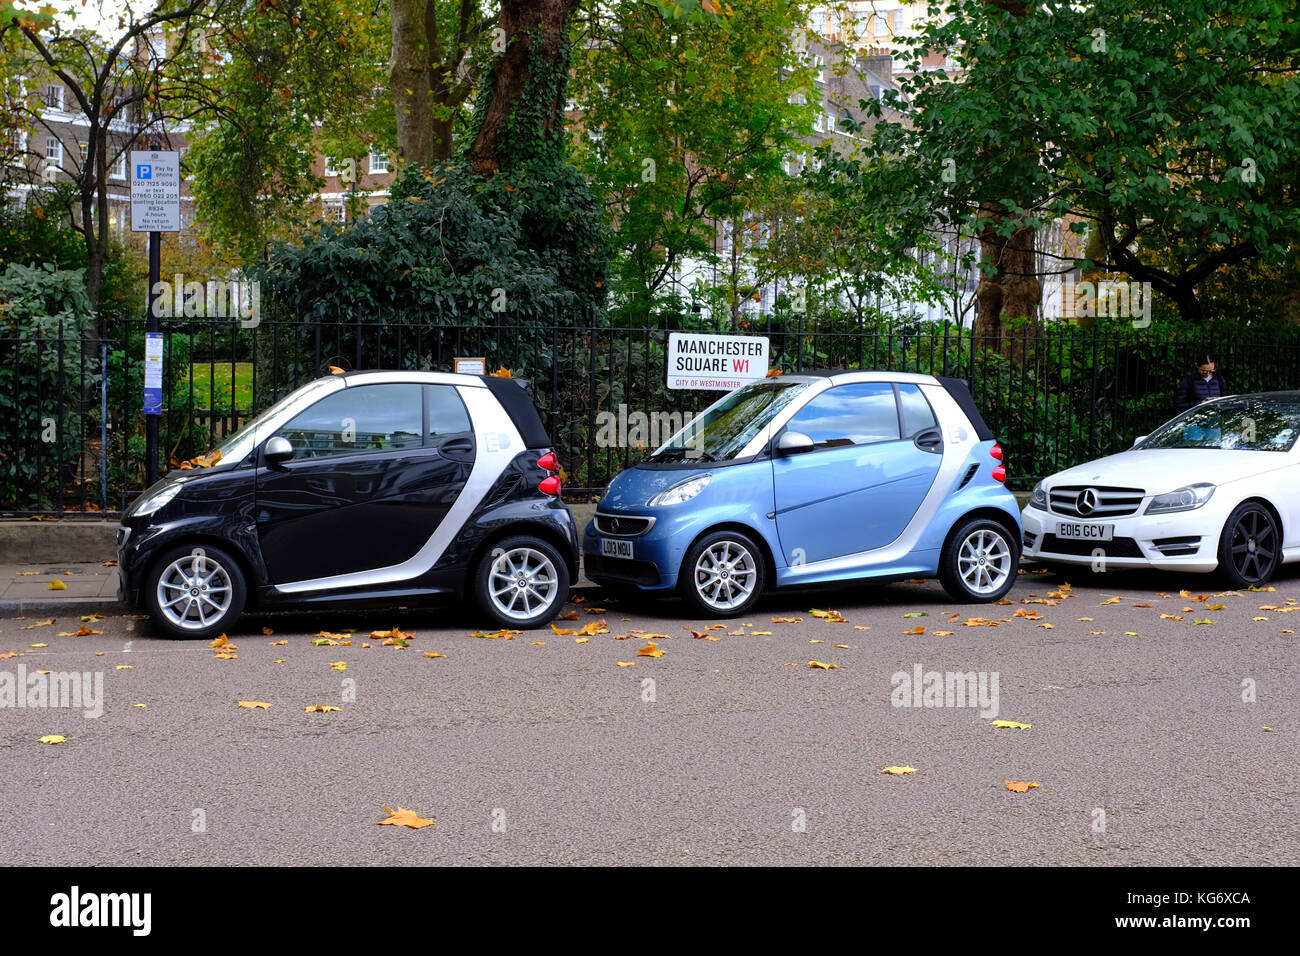 Smart Cars parked in Manchester Square London UK Stock Photo